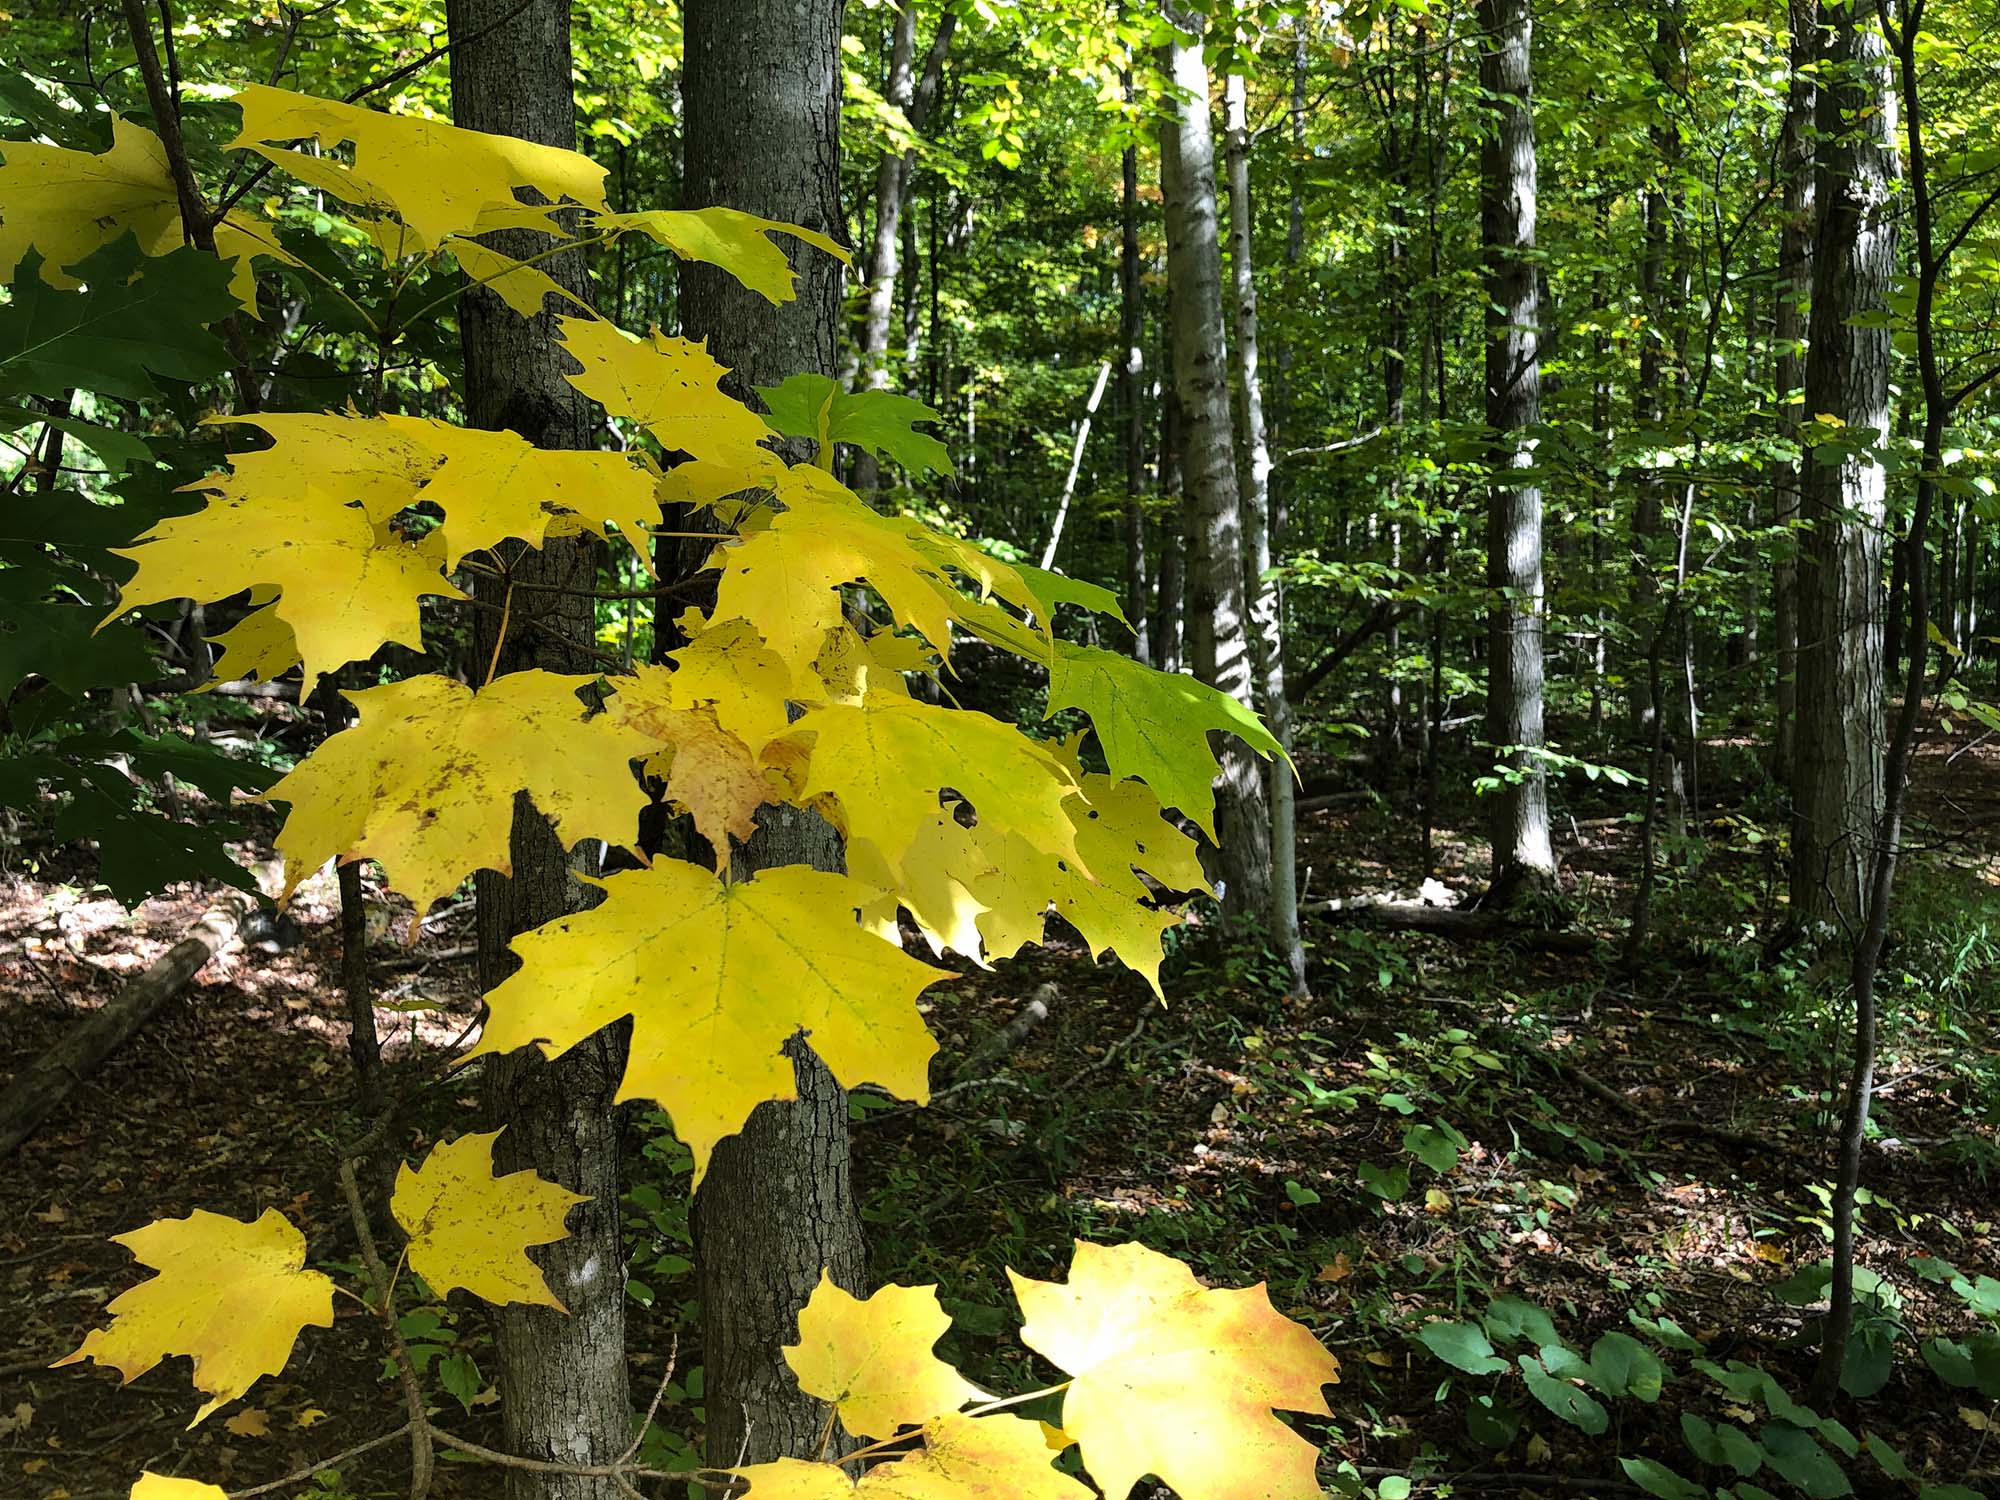 A forest; in the foreground, maple leaves on a tree are turning yellow